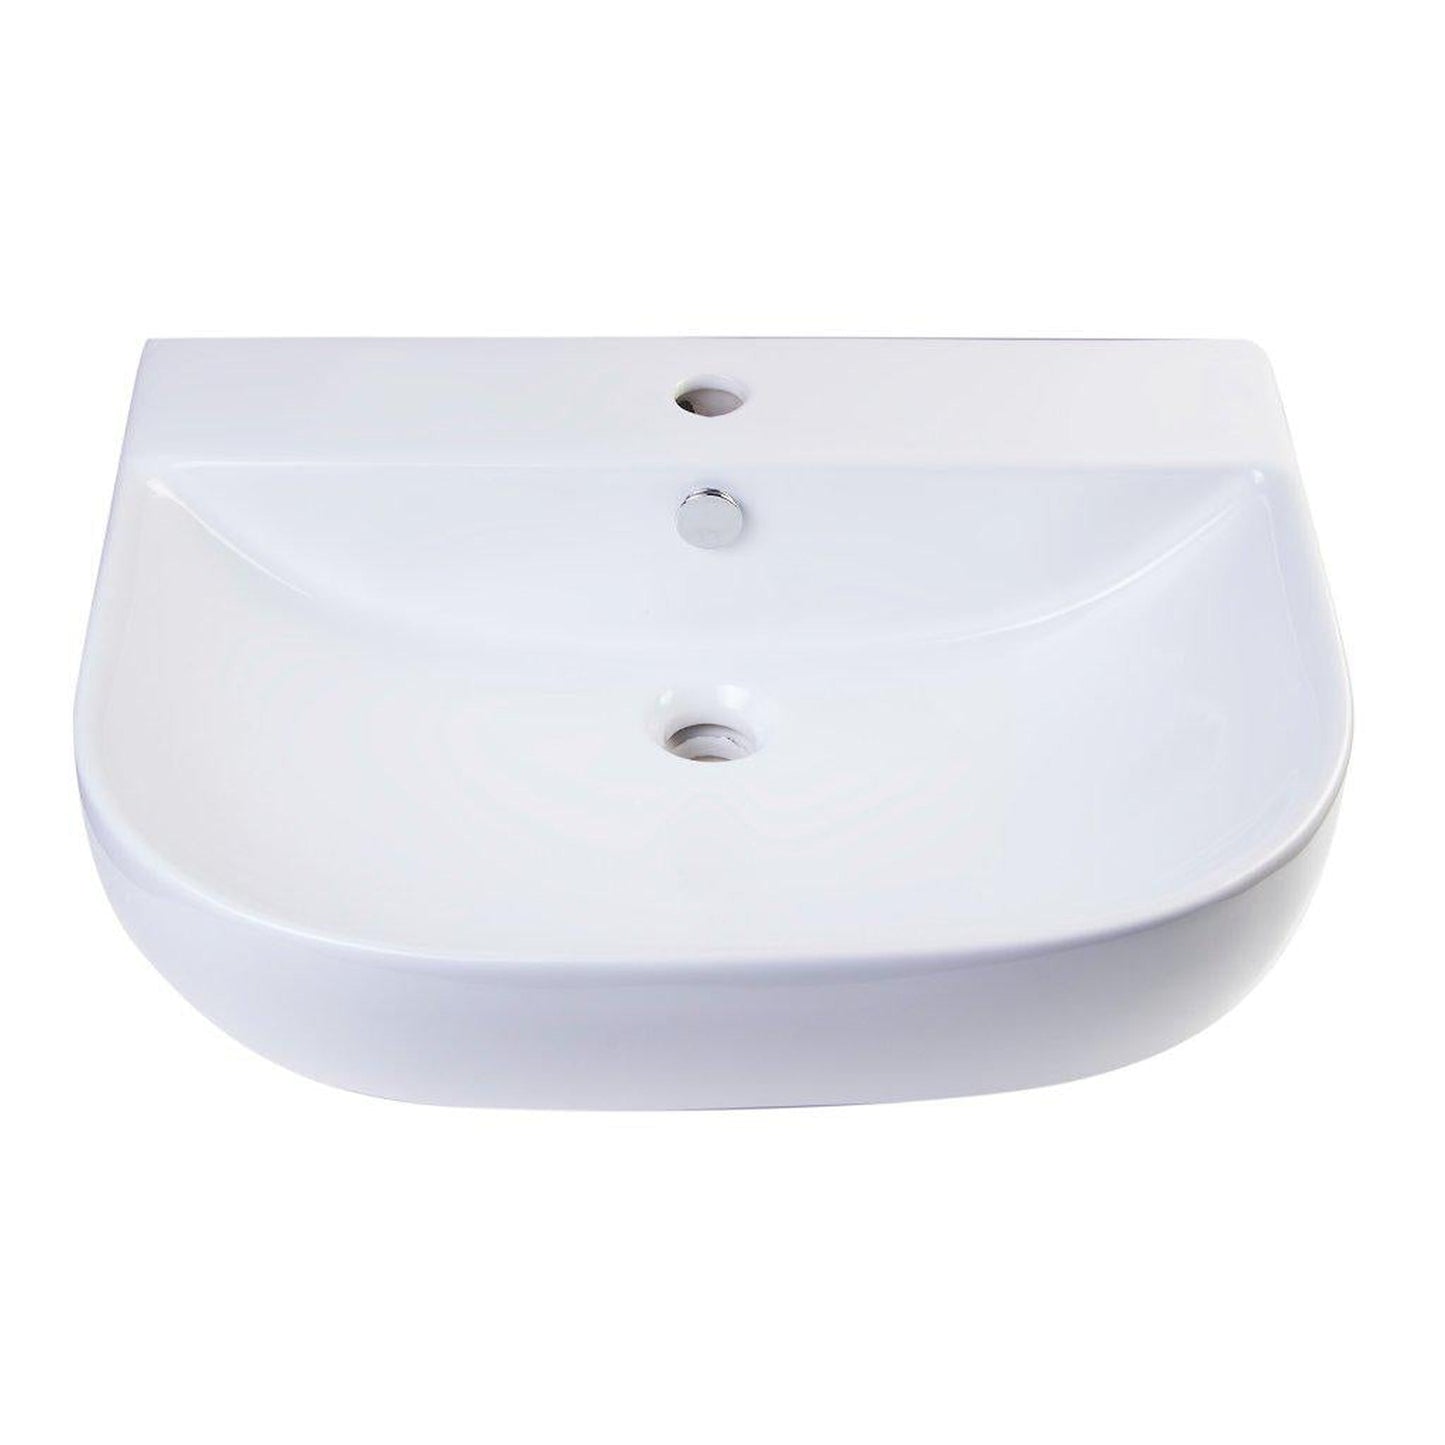 ALFI Brand AB111 24" White Wall-Mounted D-Shaped Bathroom Sink With Single Faucet Hole and Overflow